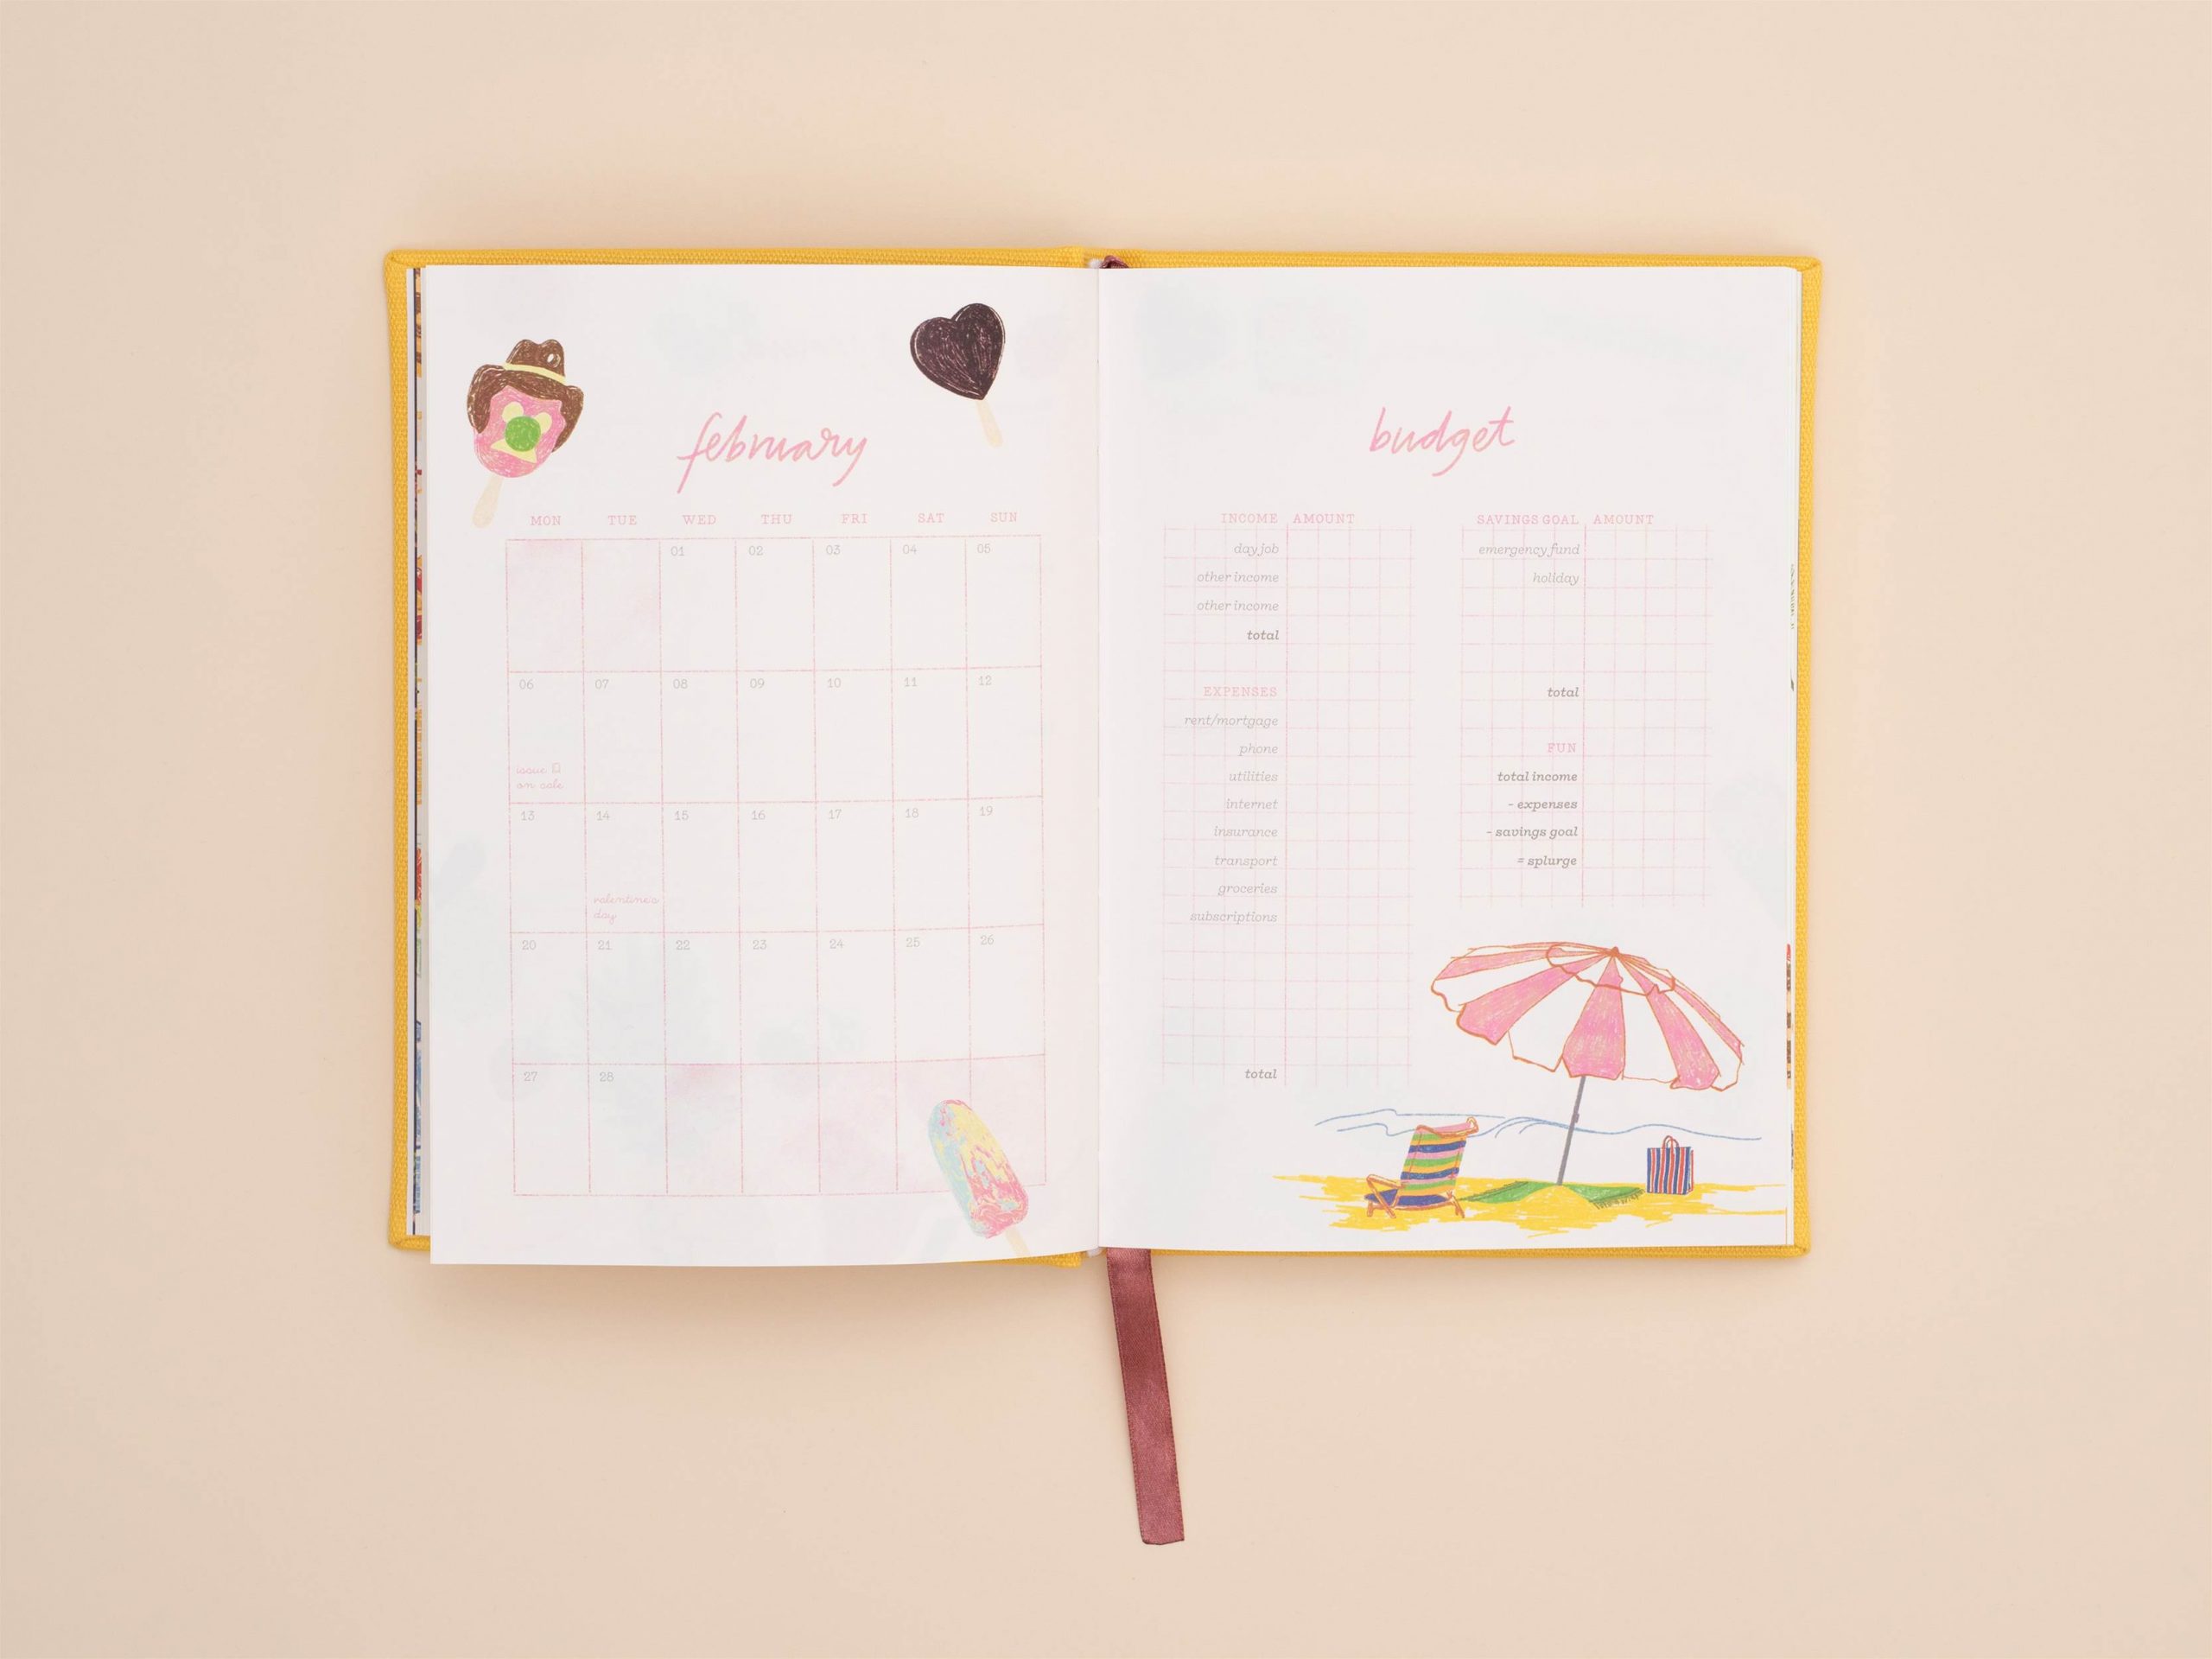 Mid Year Diary is a Timely Promotional Product